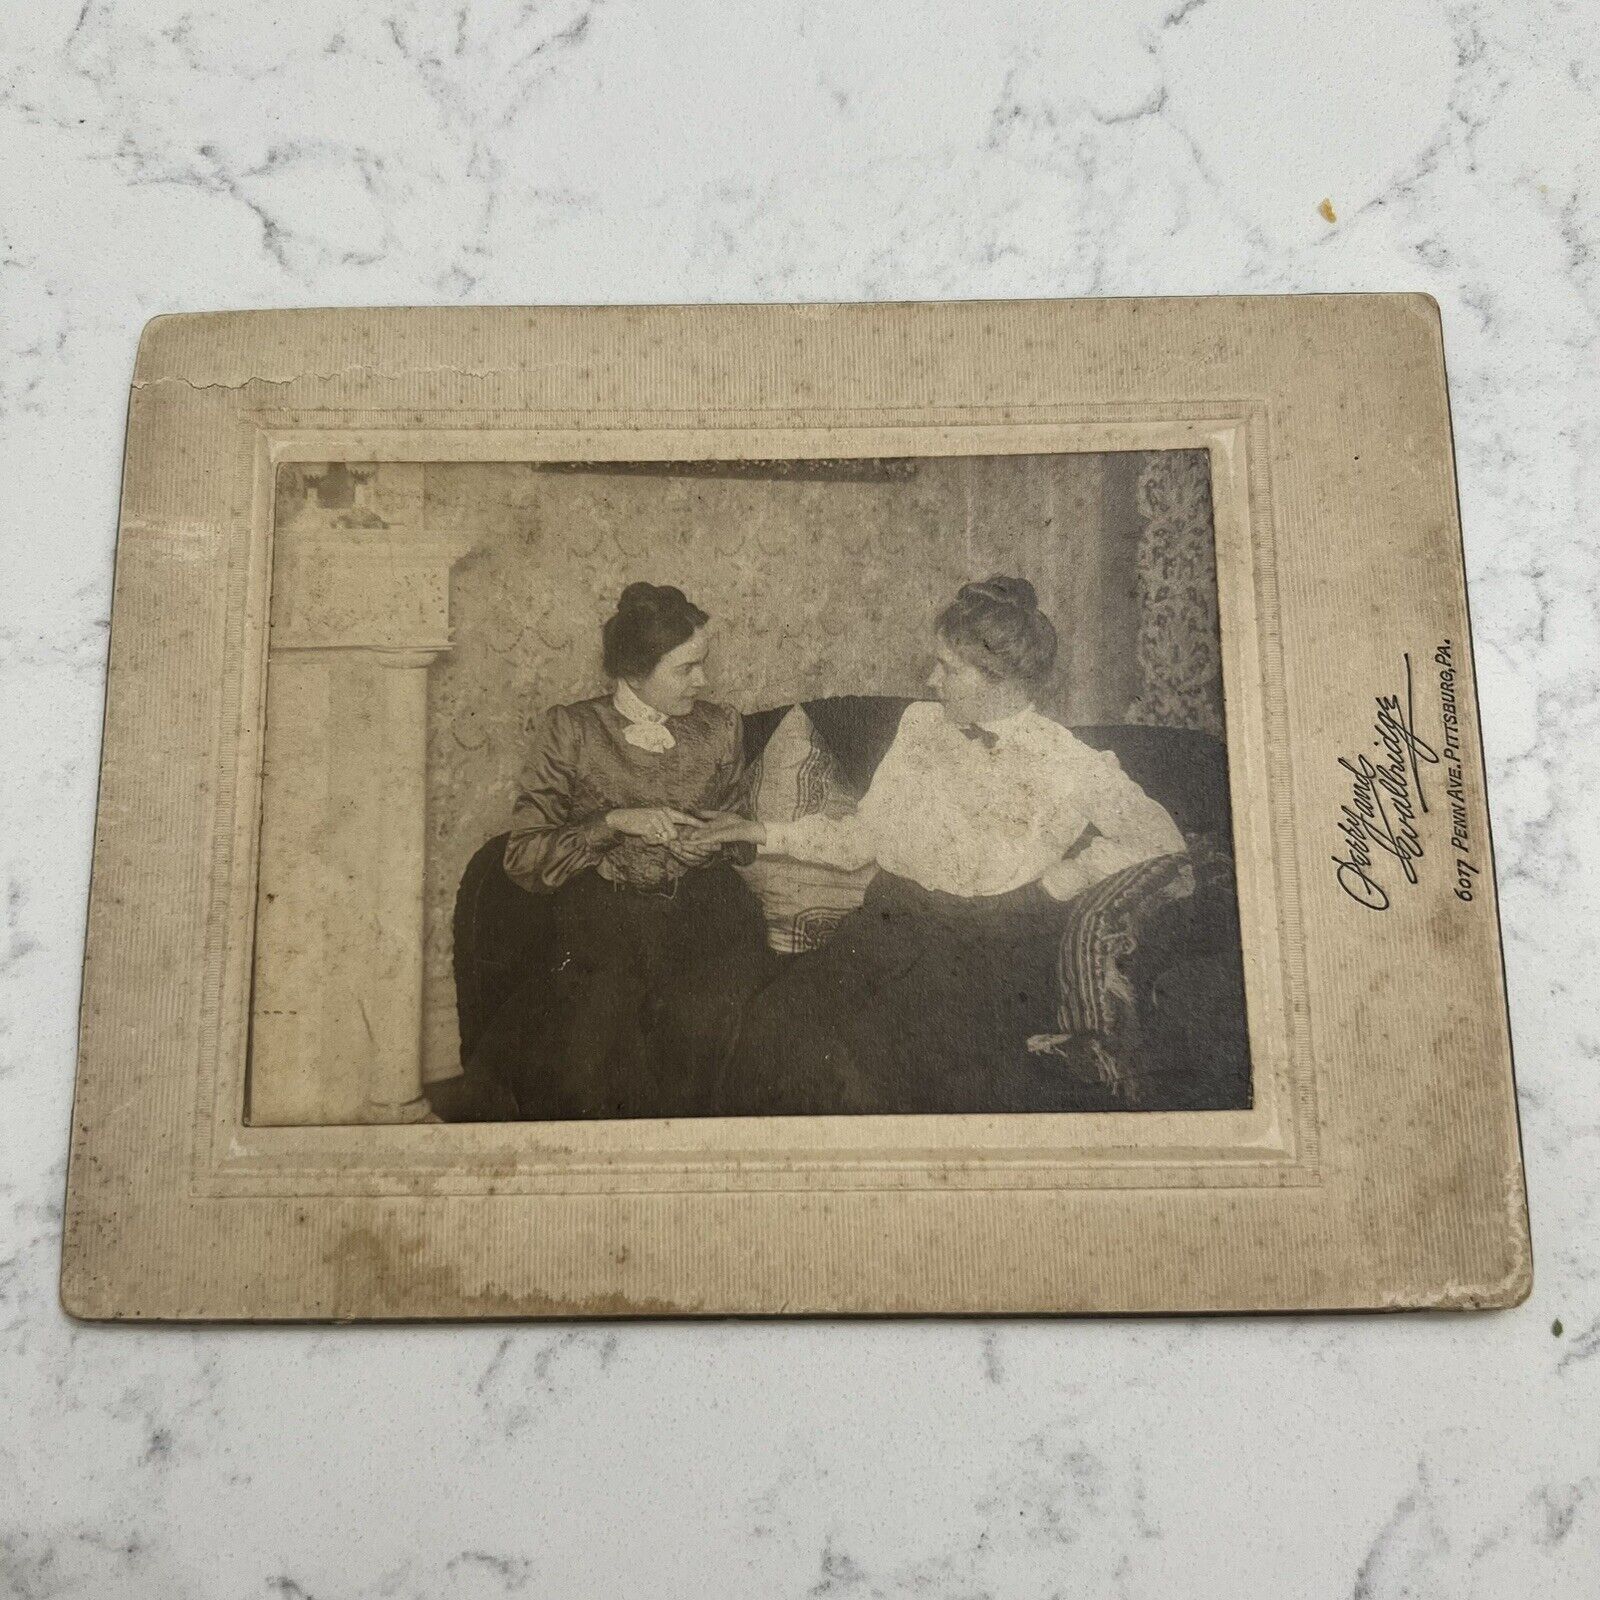 Antique Cabinet Photo 1900s Two Women Palm Reading Ghost Image Reverse PA USA